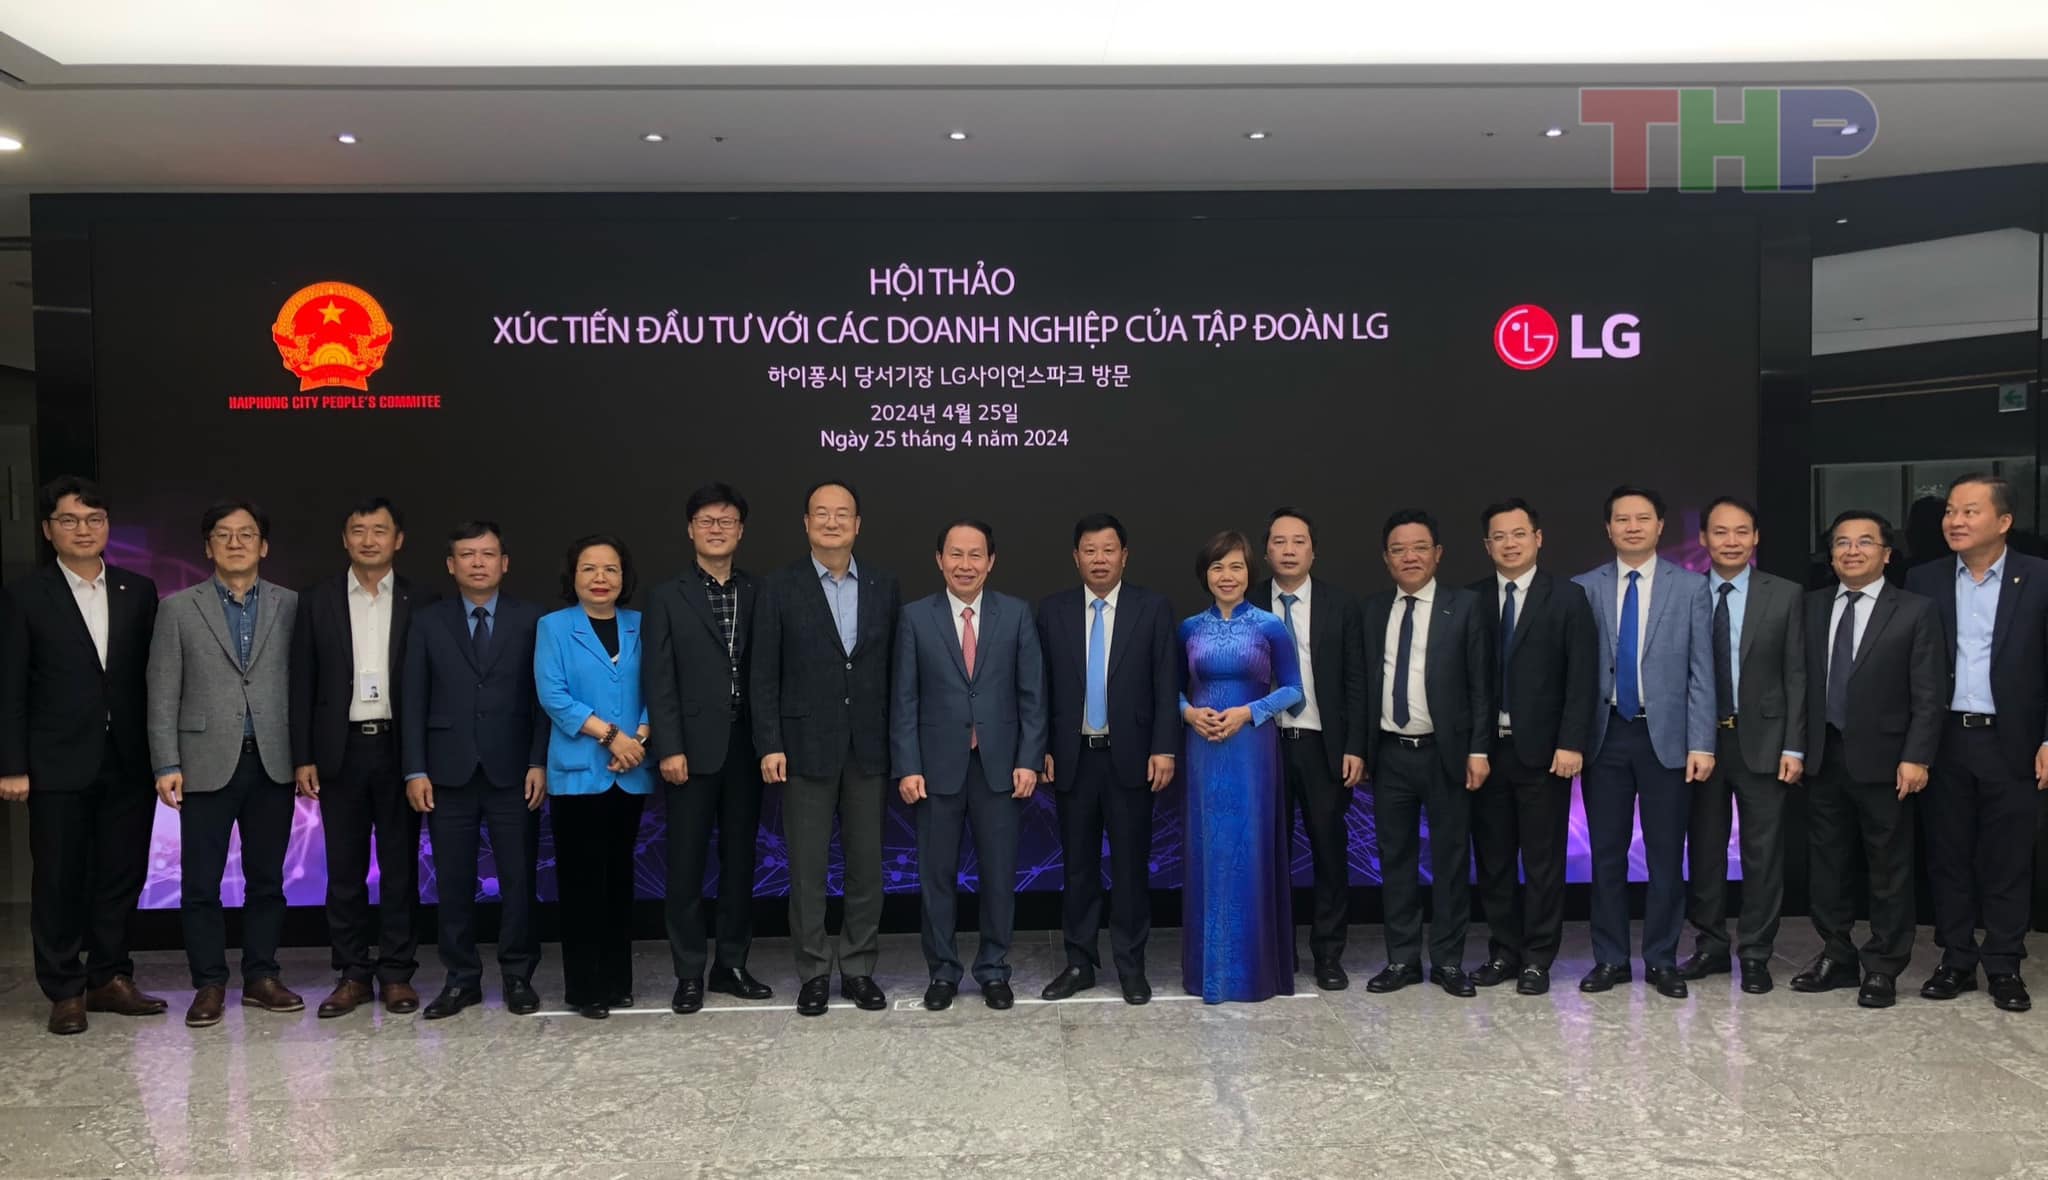 Hai Phong city will be the "investment key" of LG Group, Korea